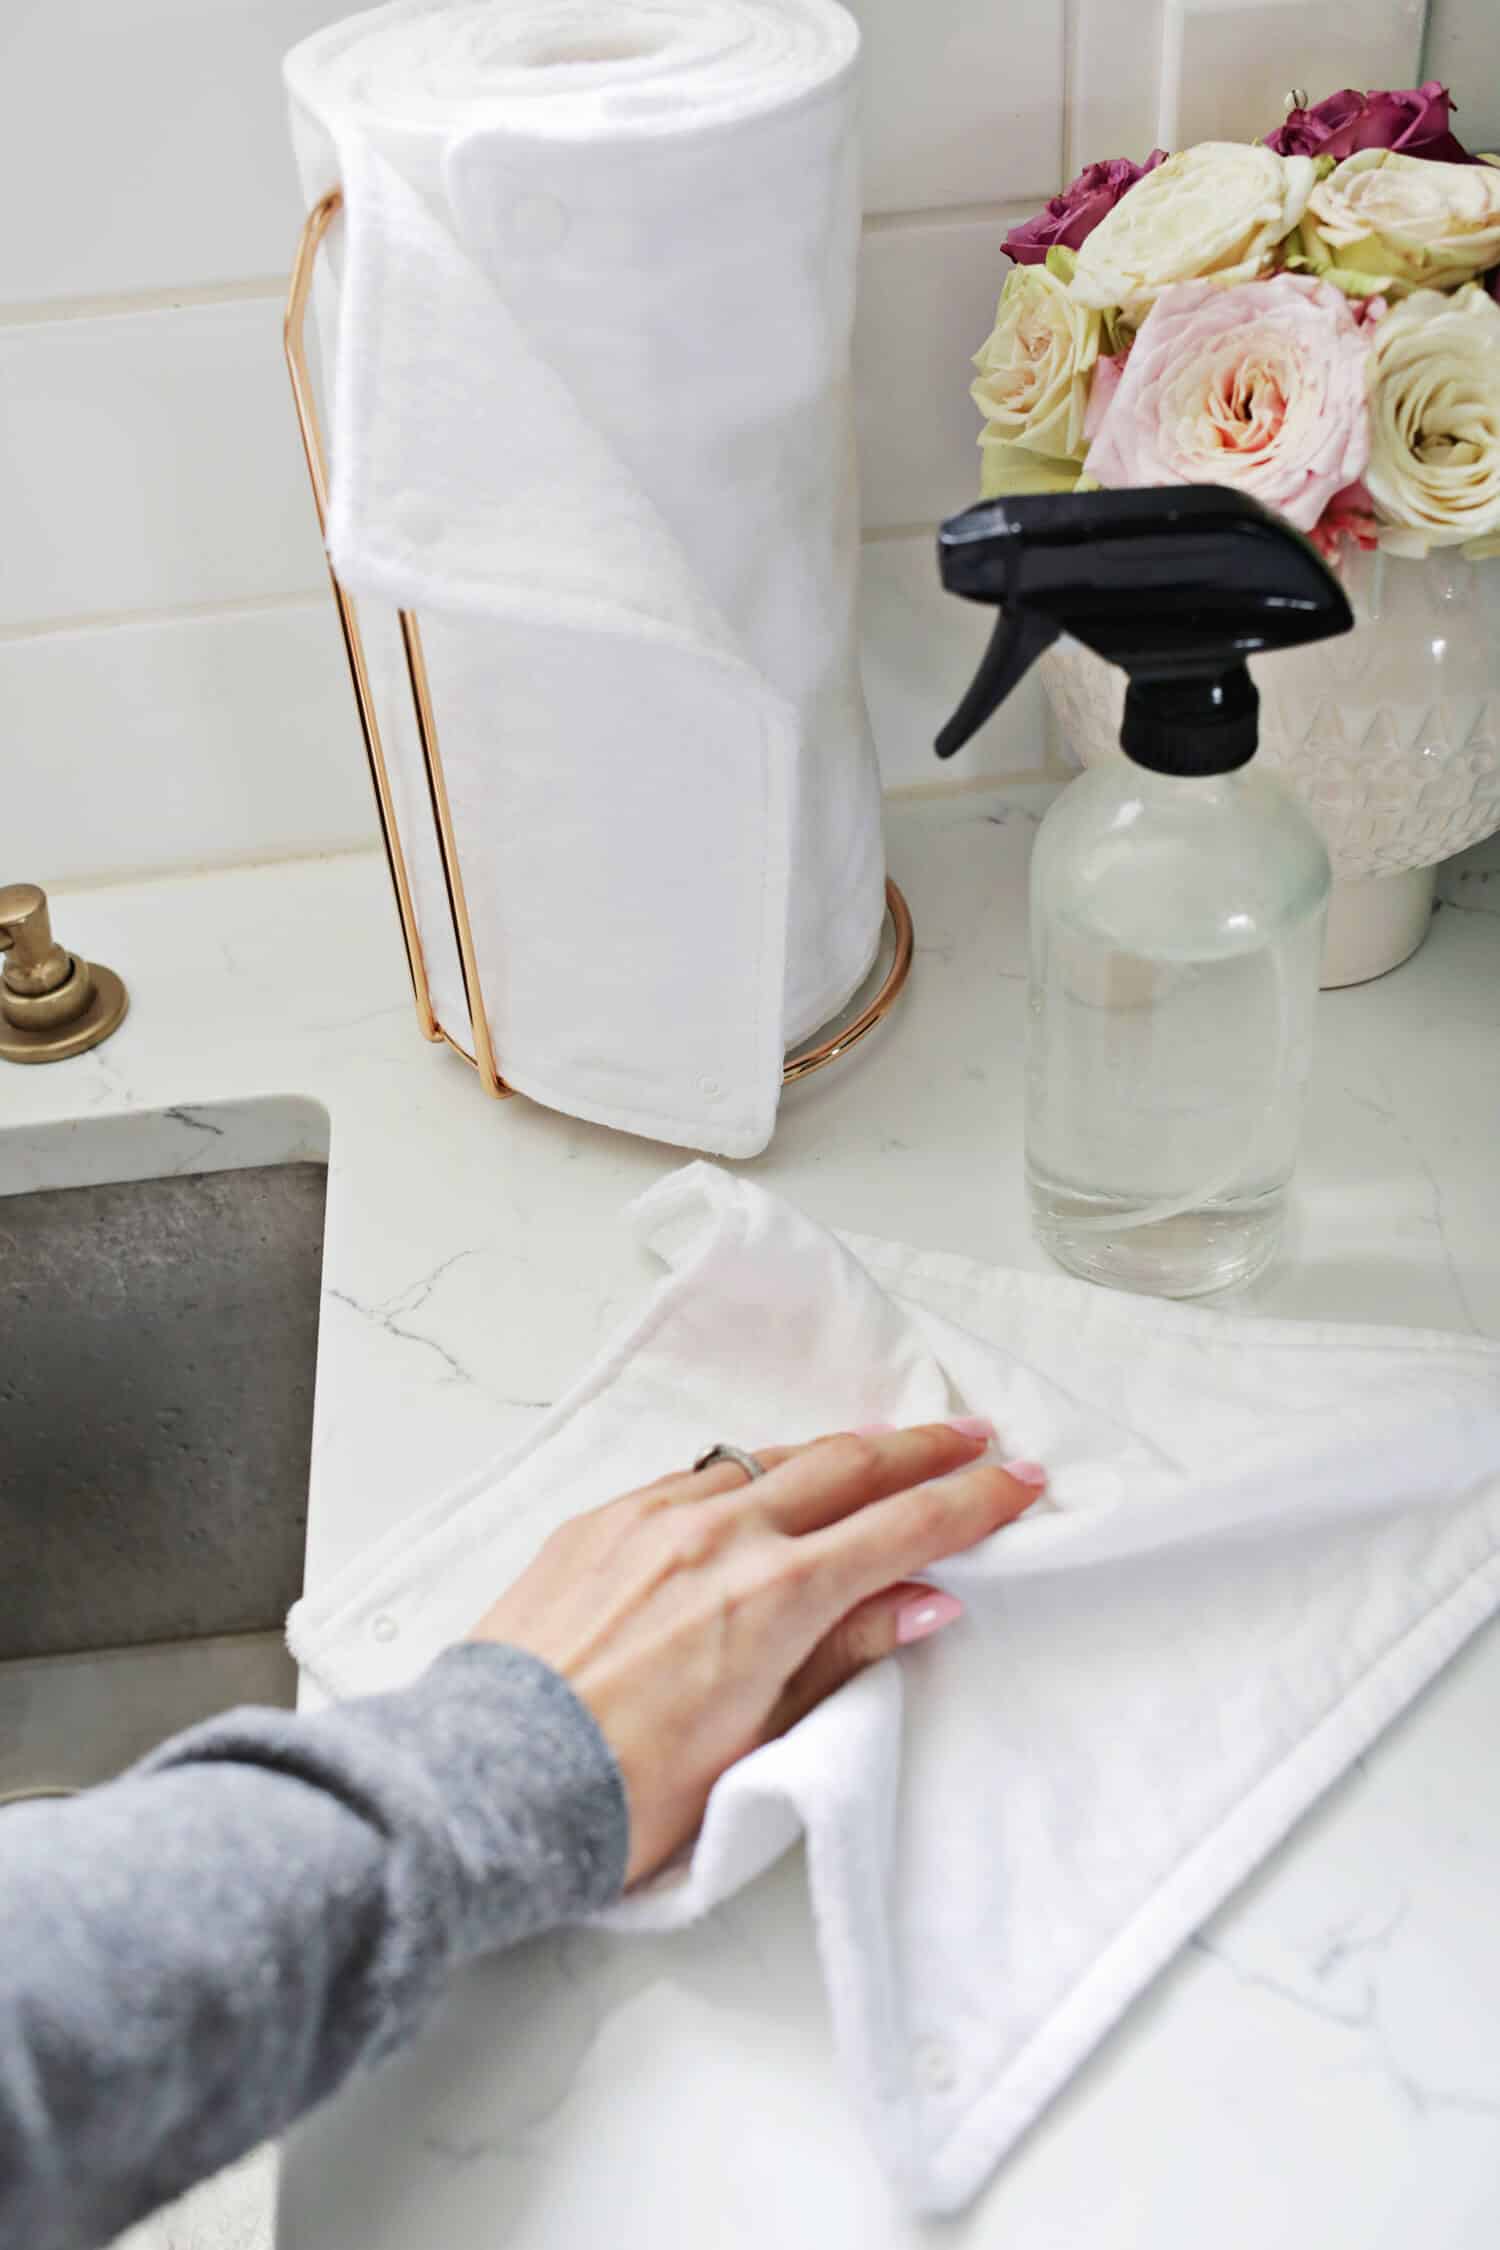 unpaper towels on towel holder with spray bottle and vase of flower next to it and someone cleaning the counter